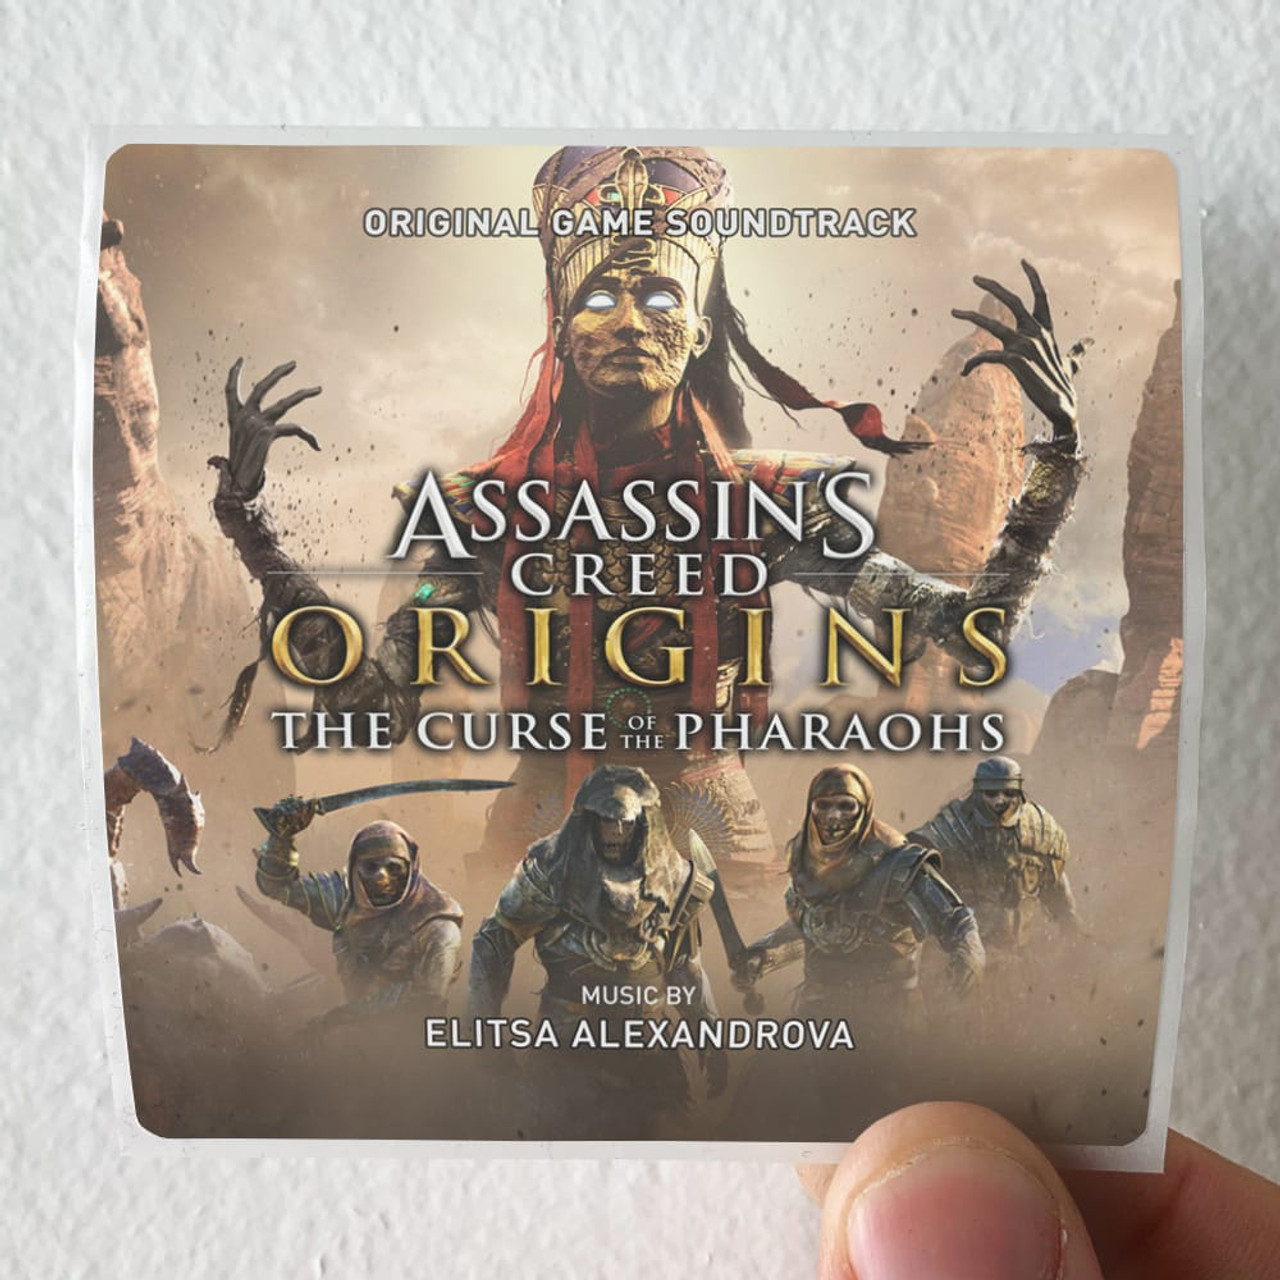 Buy Assassins Creed Origins The Curse of the Pharaohs